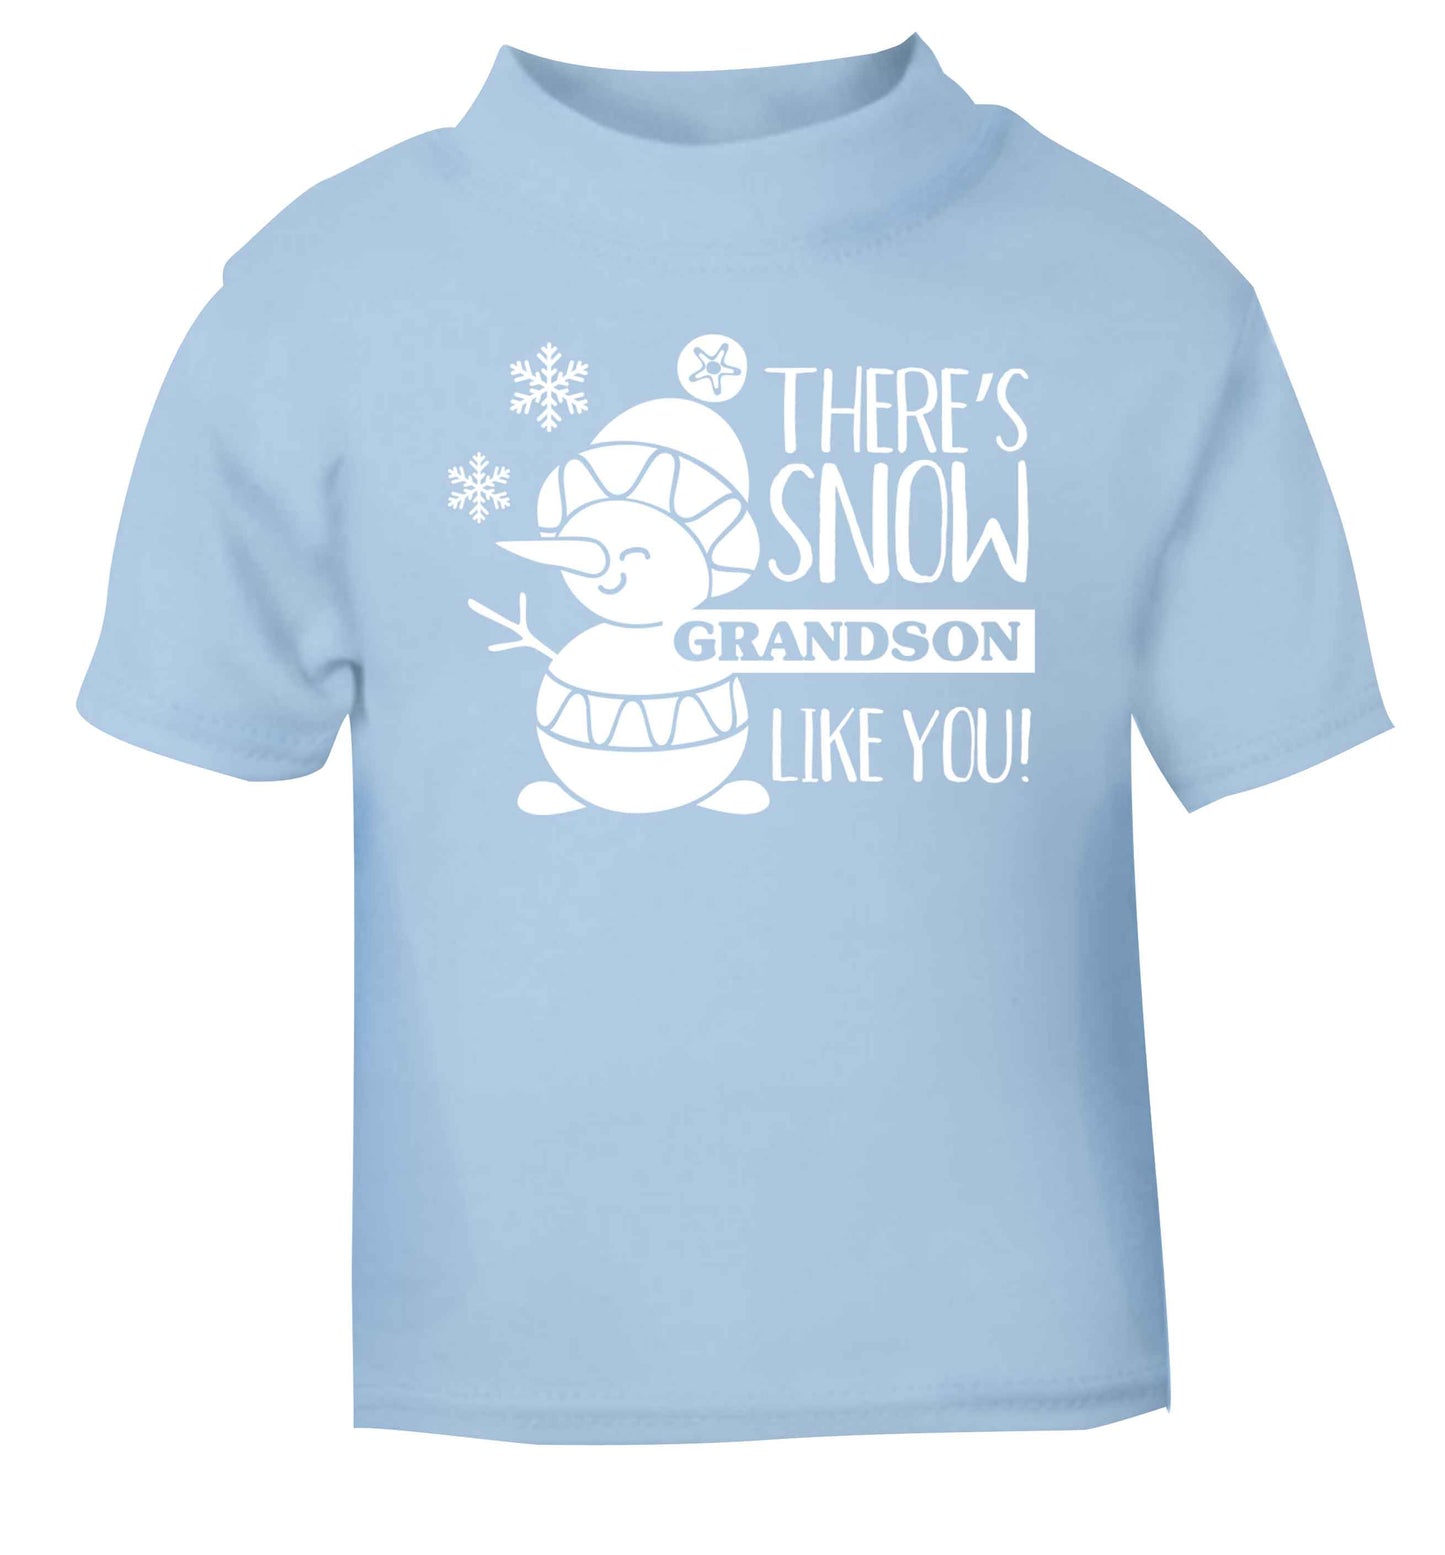 There's snow grandson like you light blue baby toddler Tshirt 2 Years